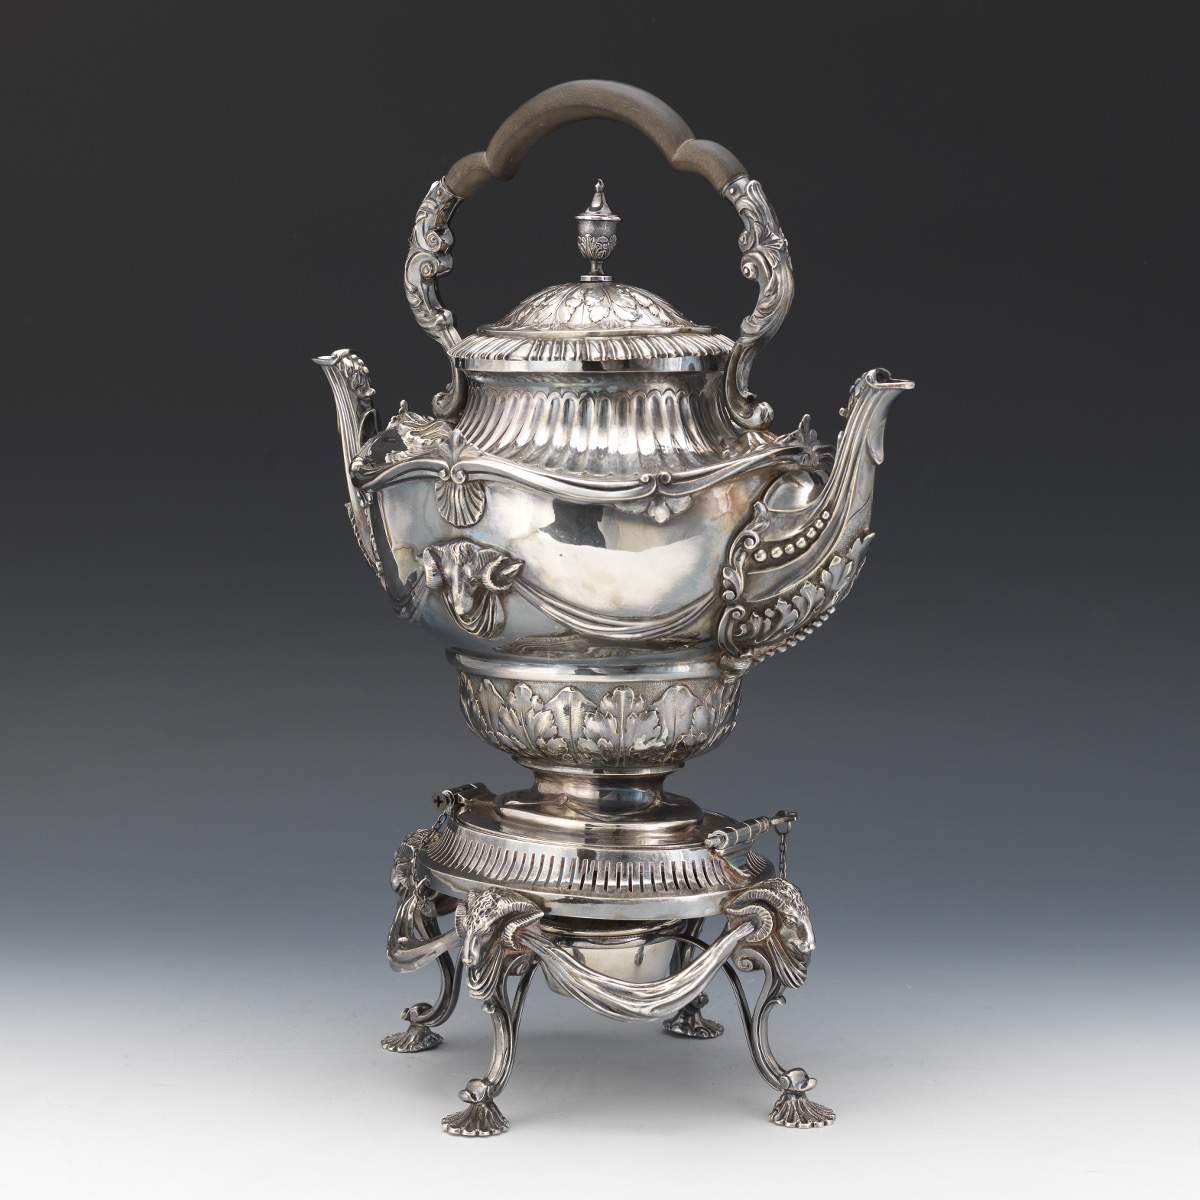 Impressive Sheffield Silver Plated Double Spout Tilted Hot Water Kettle, ca. late 19th Century - Image 5 of 9